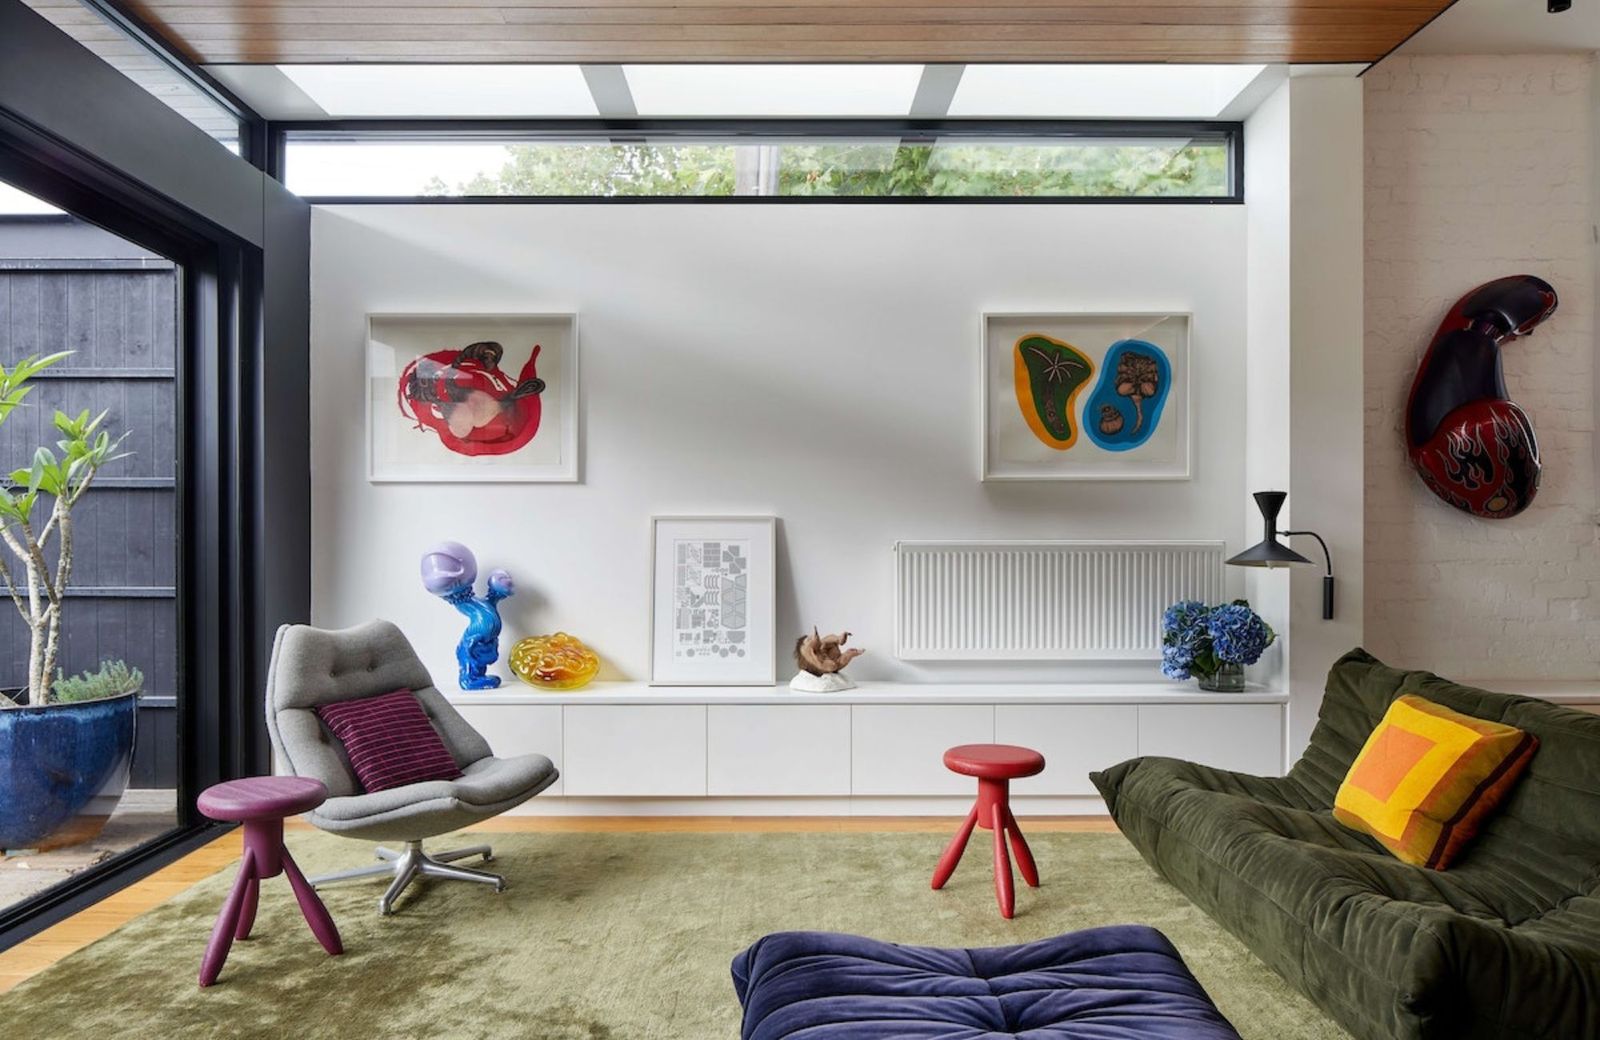 Artforms by Hindley & Co. Living room featuring bold colours and geometric shapes